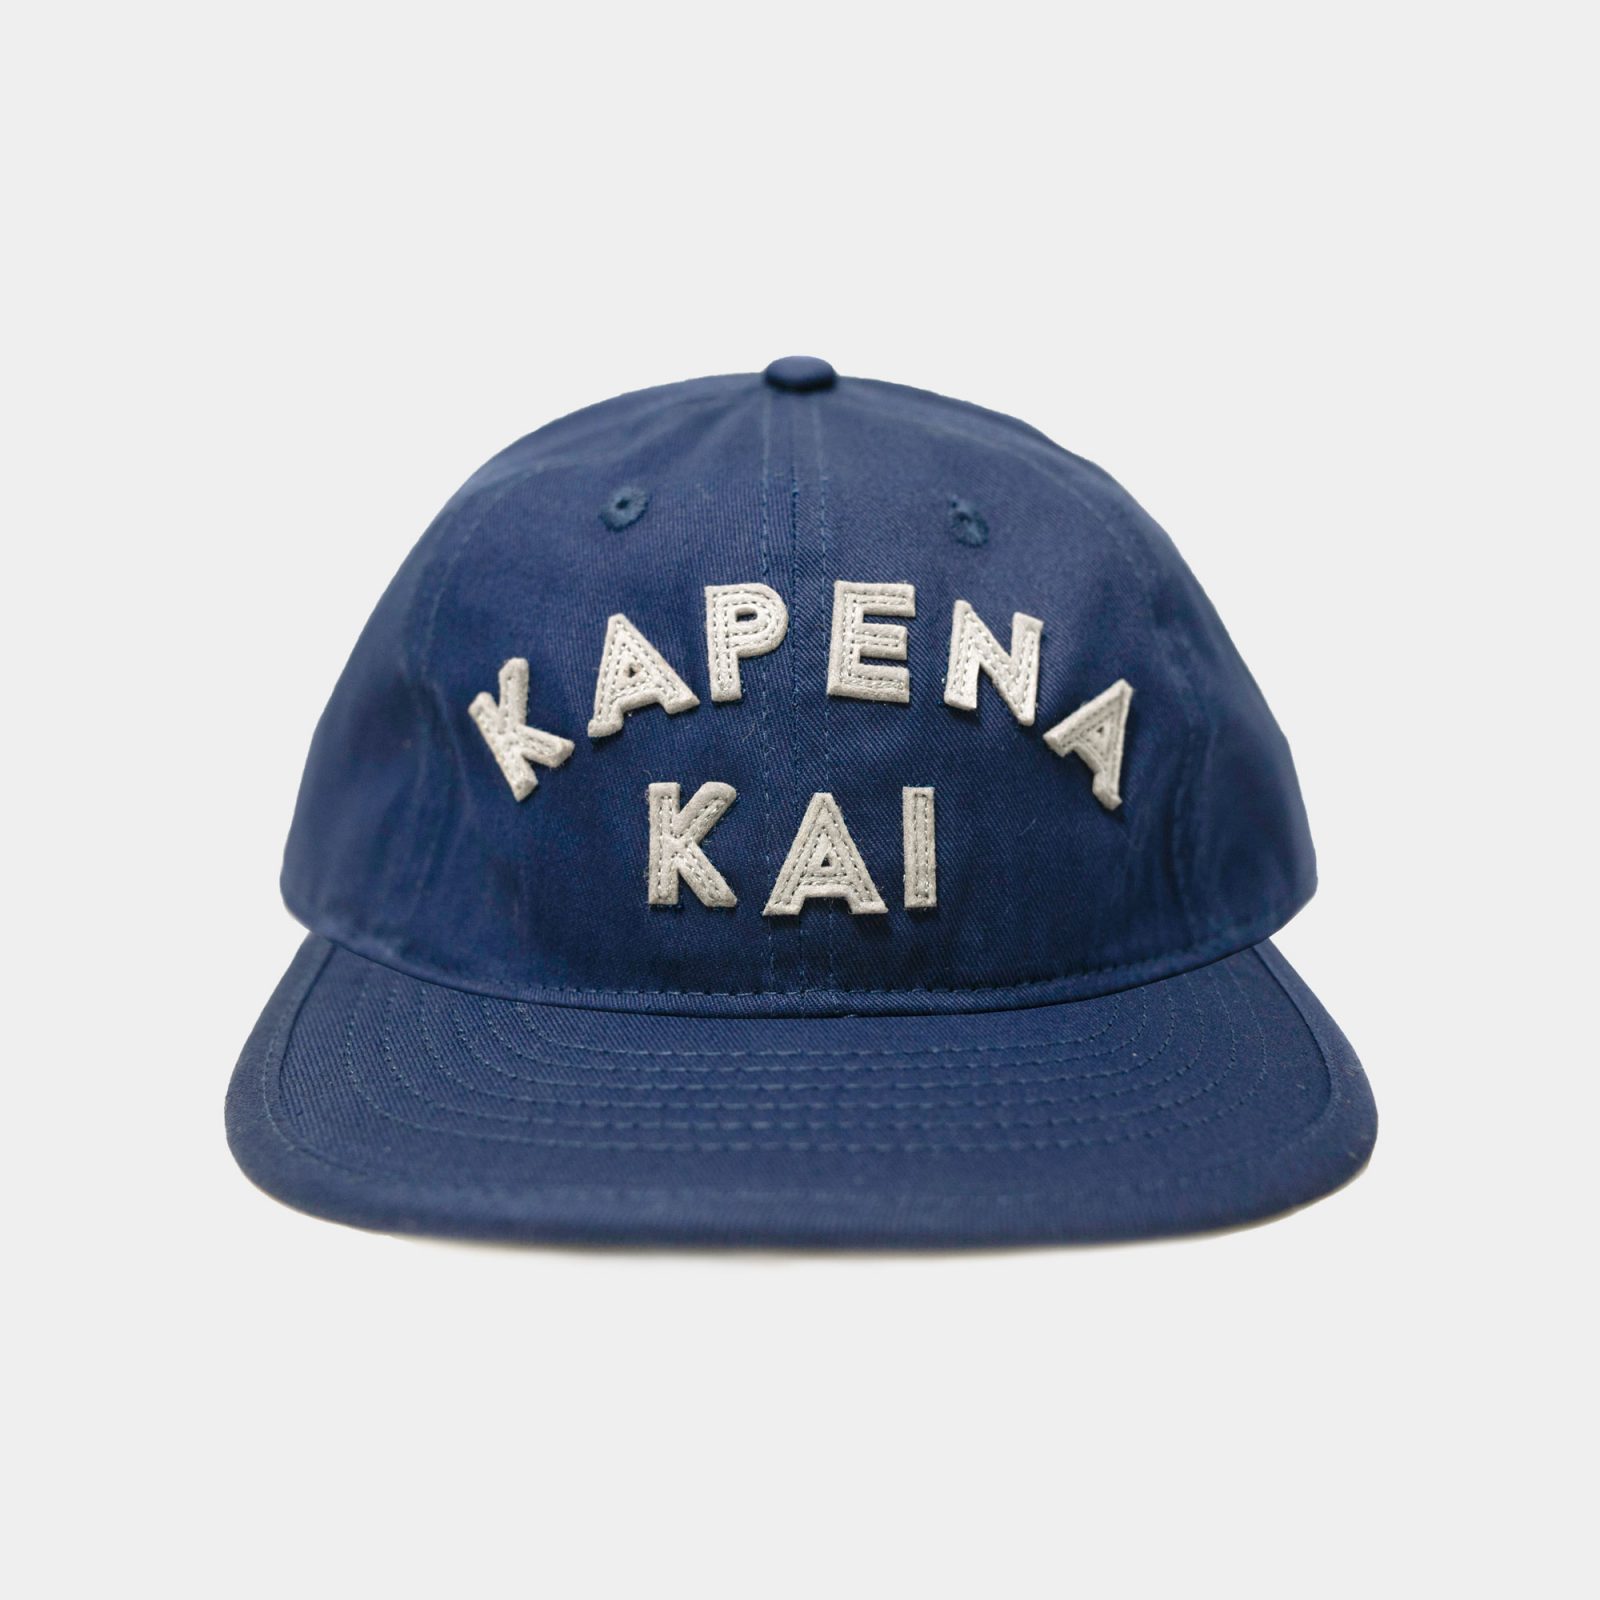 Lettered Company Cap Navy